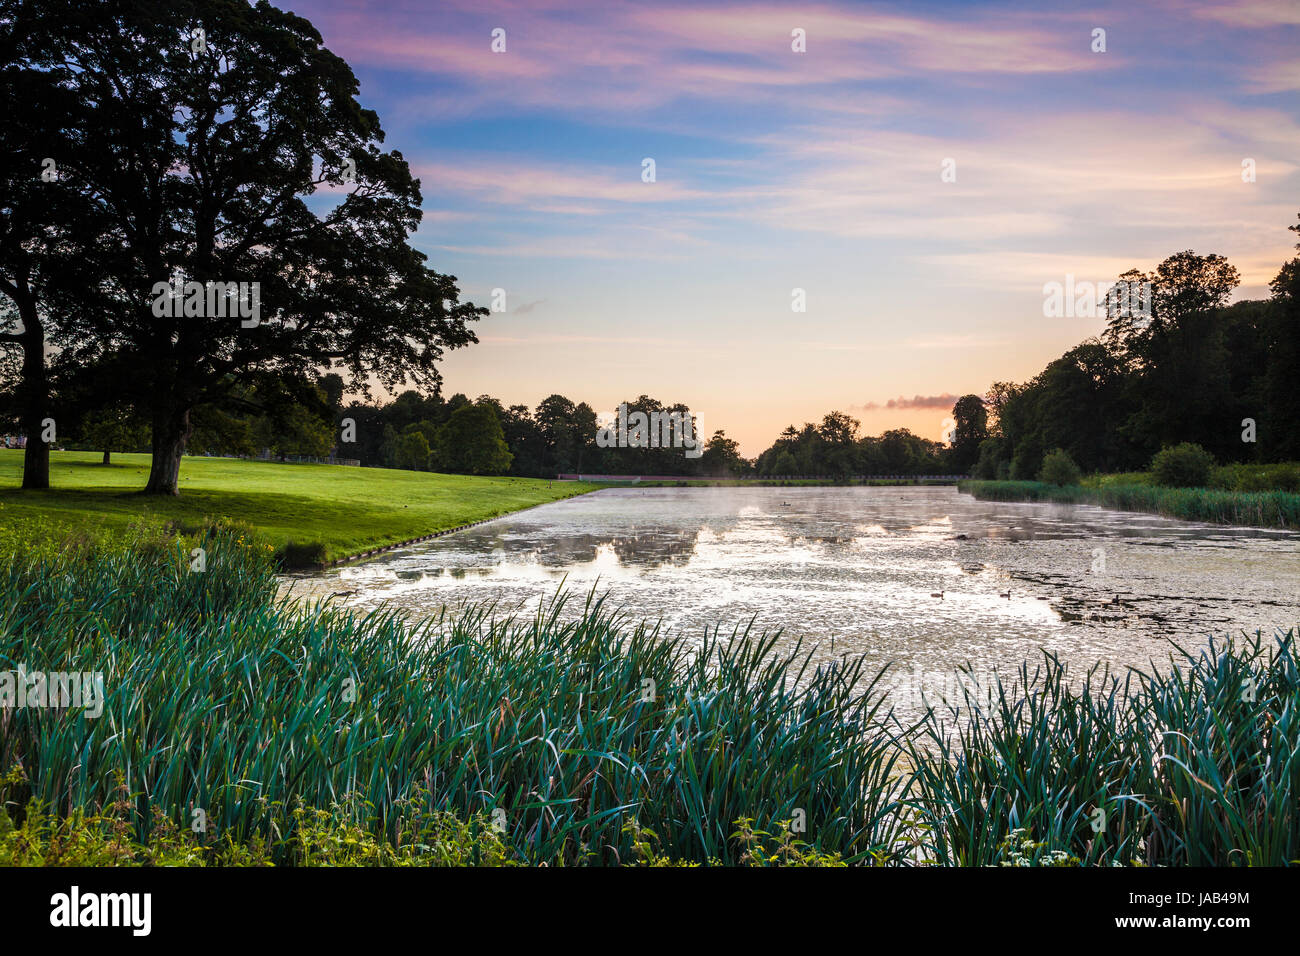 A summer sunrise over the lake at Lydiard Park in Swindon, Wiltshire. Stock Photo